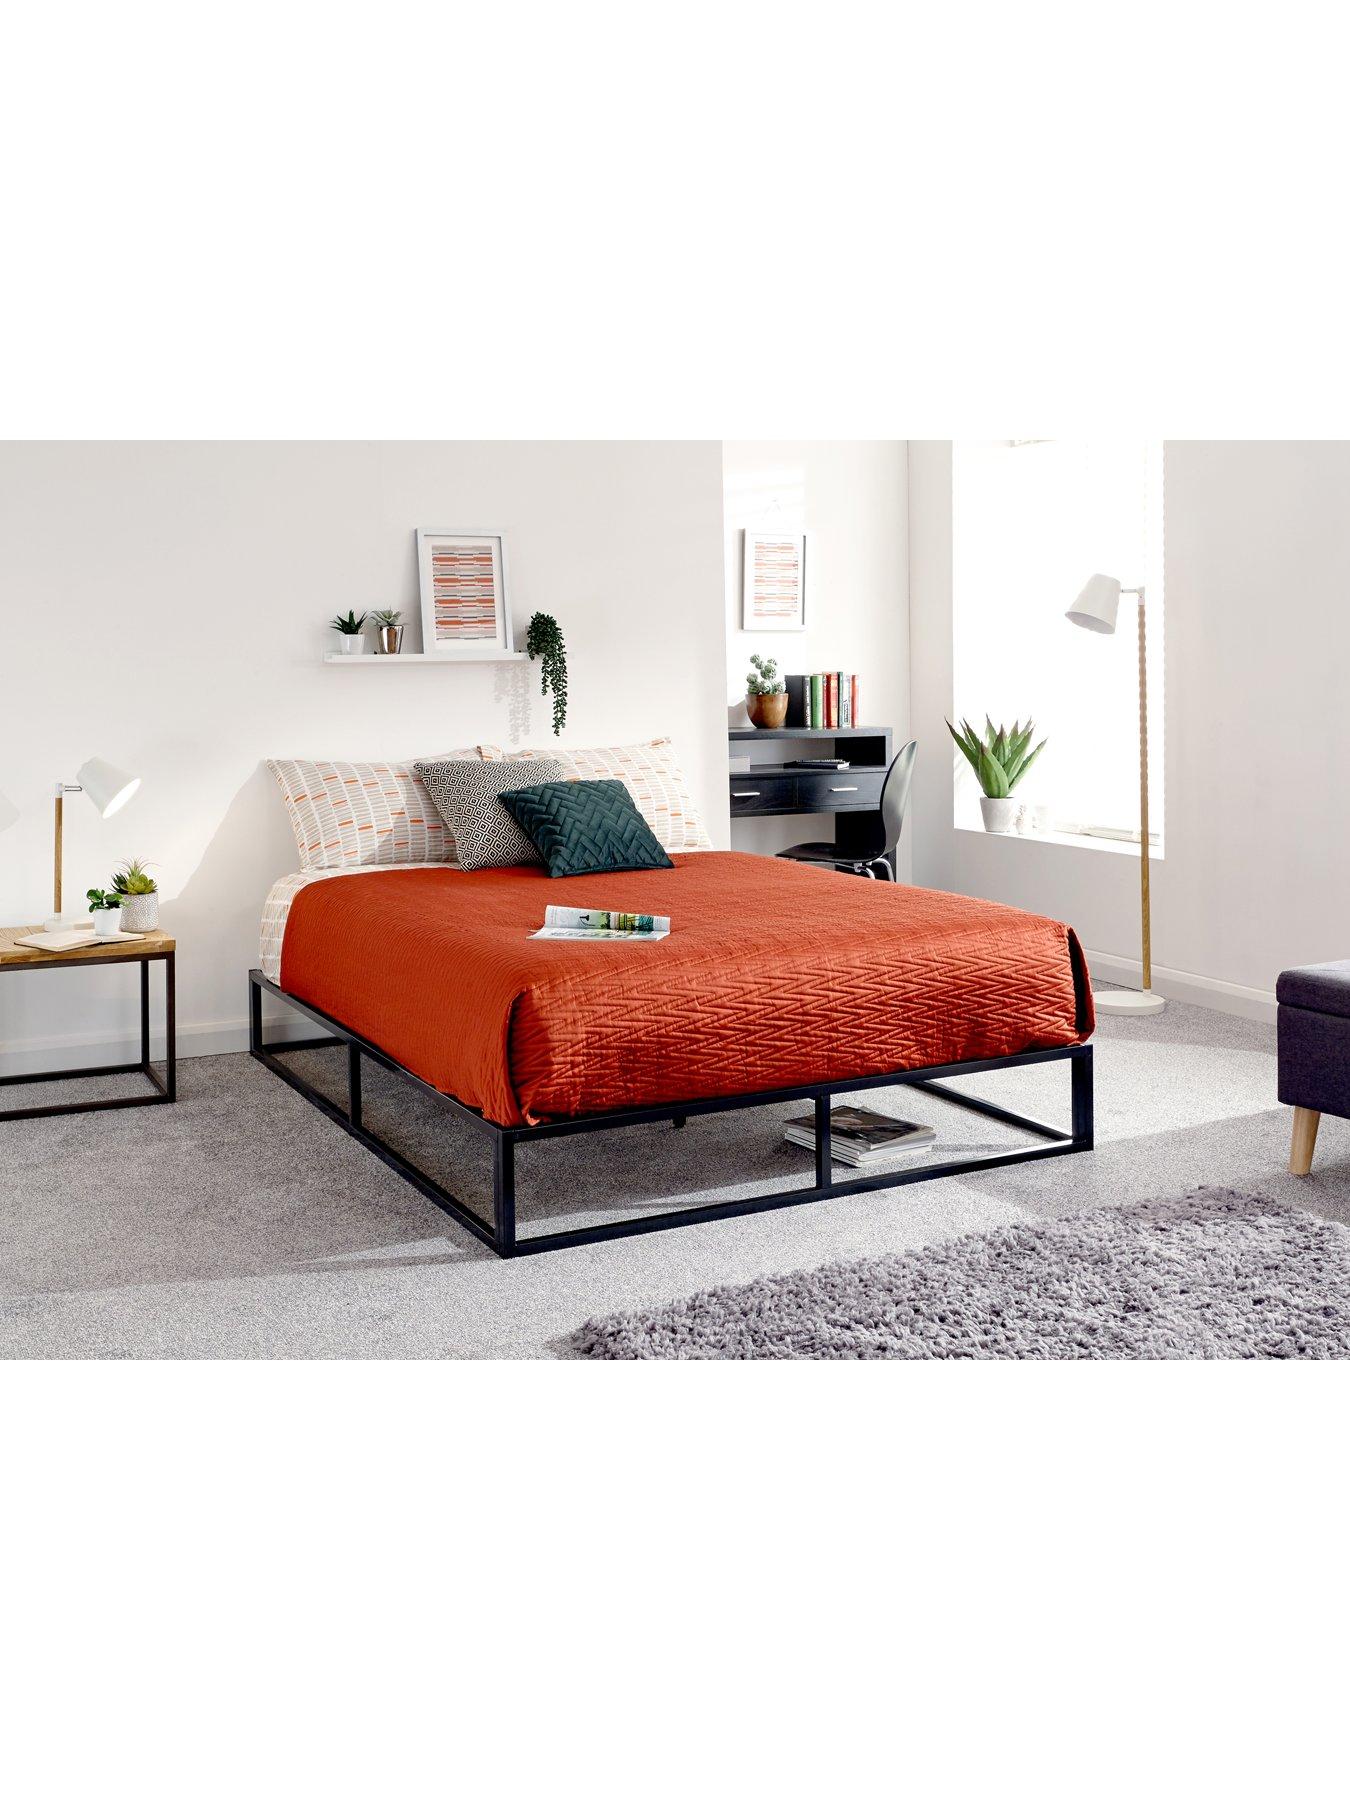 Gfw Platform Small Double Bed Frame - Black